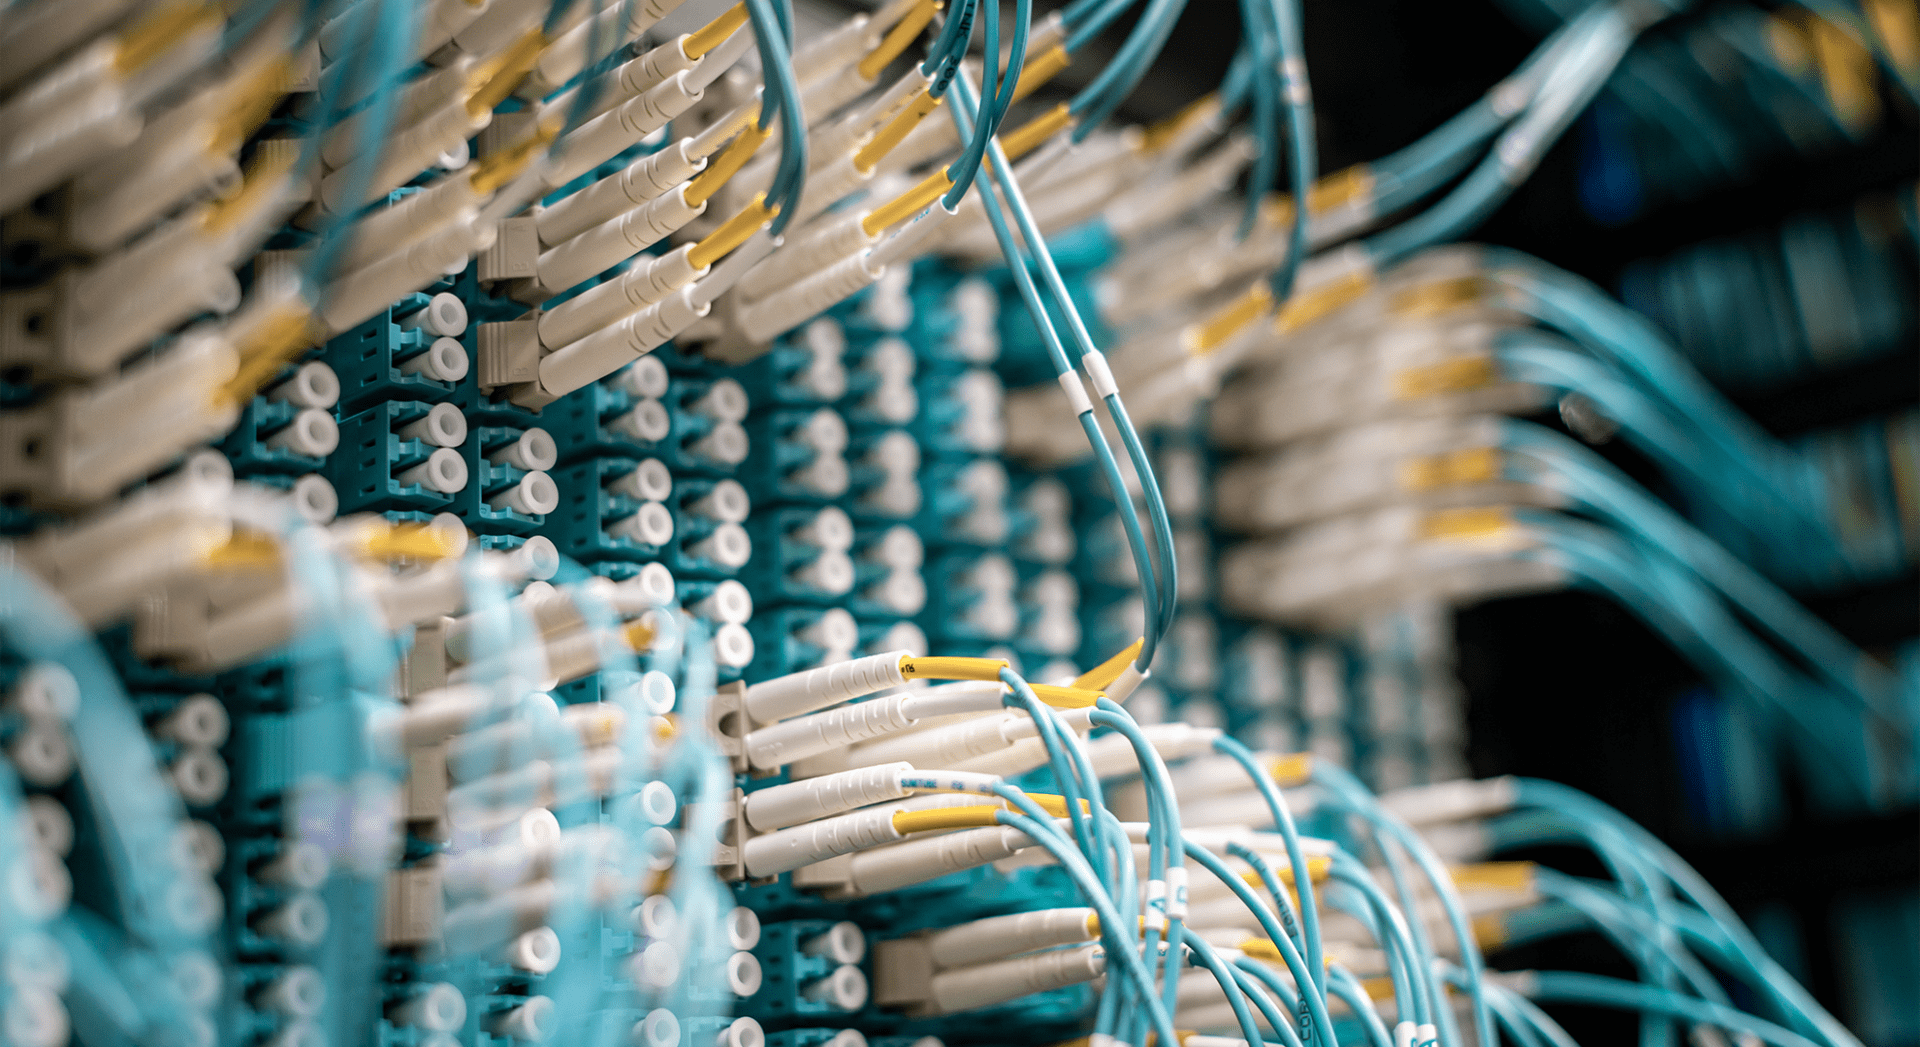 Fiber optic cables in switch board